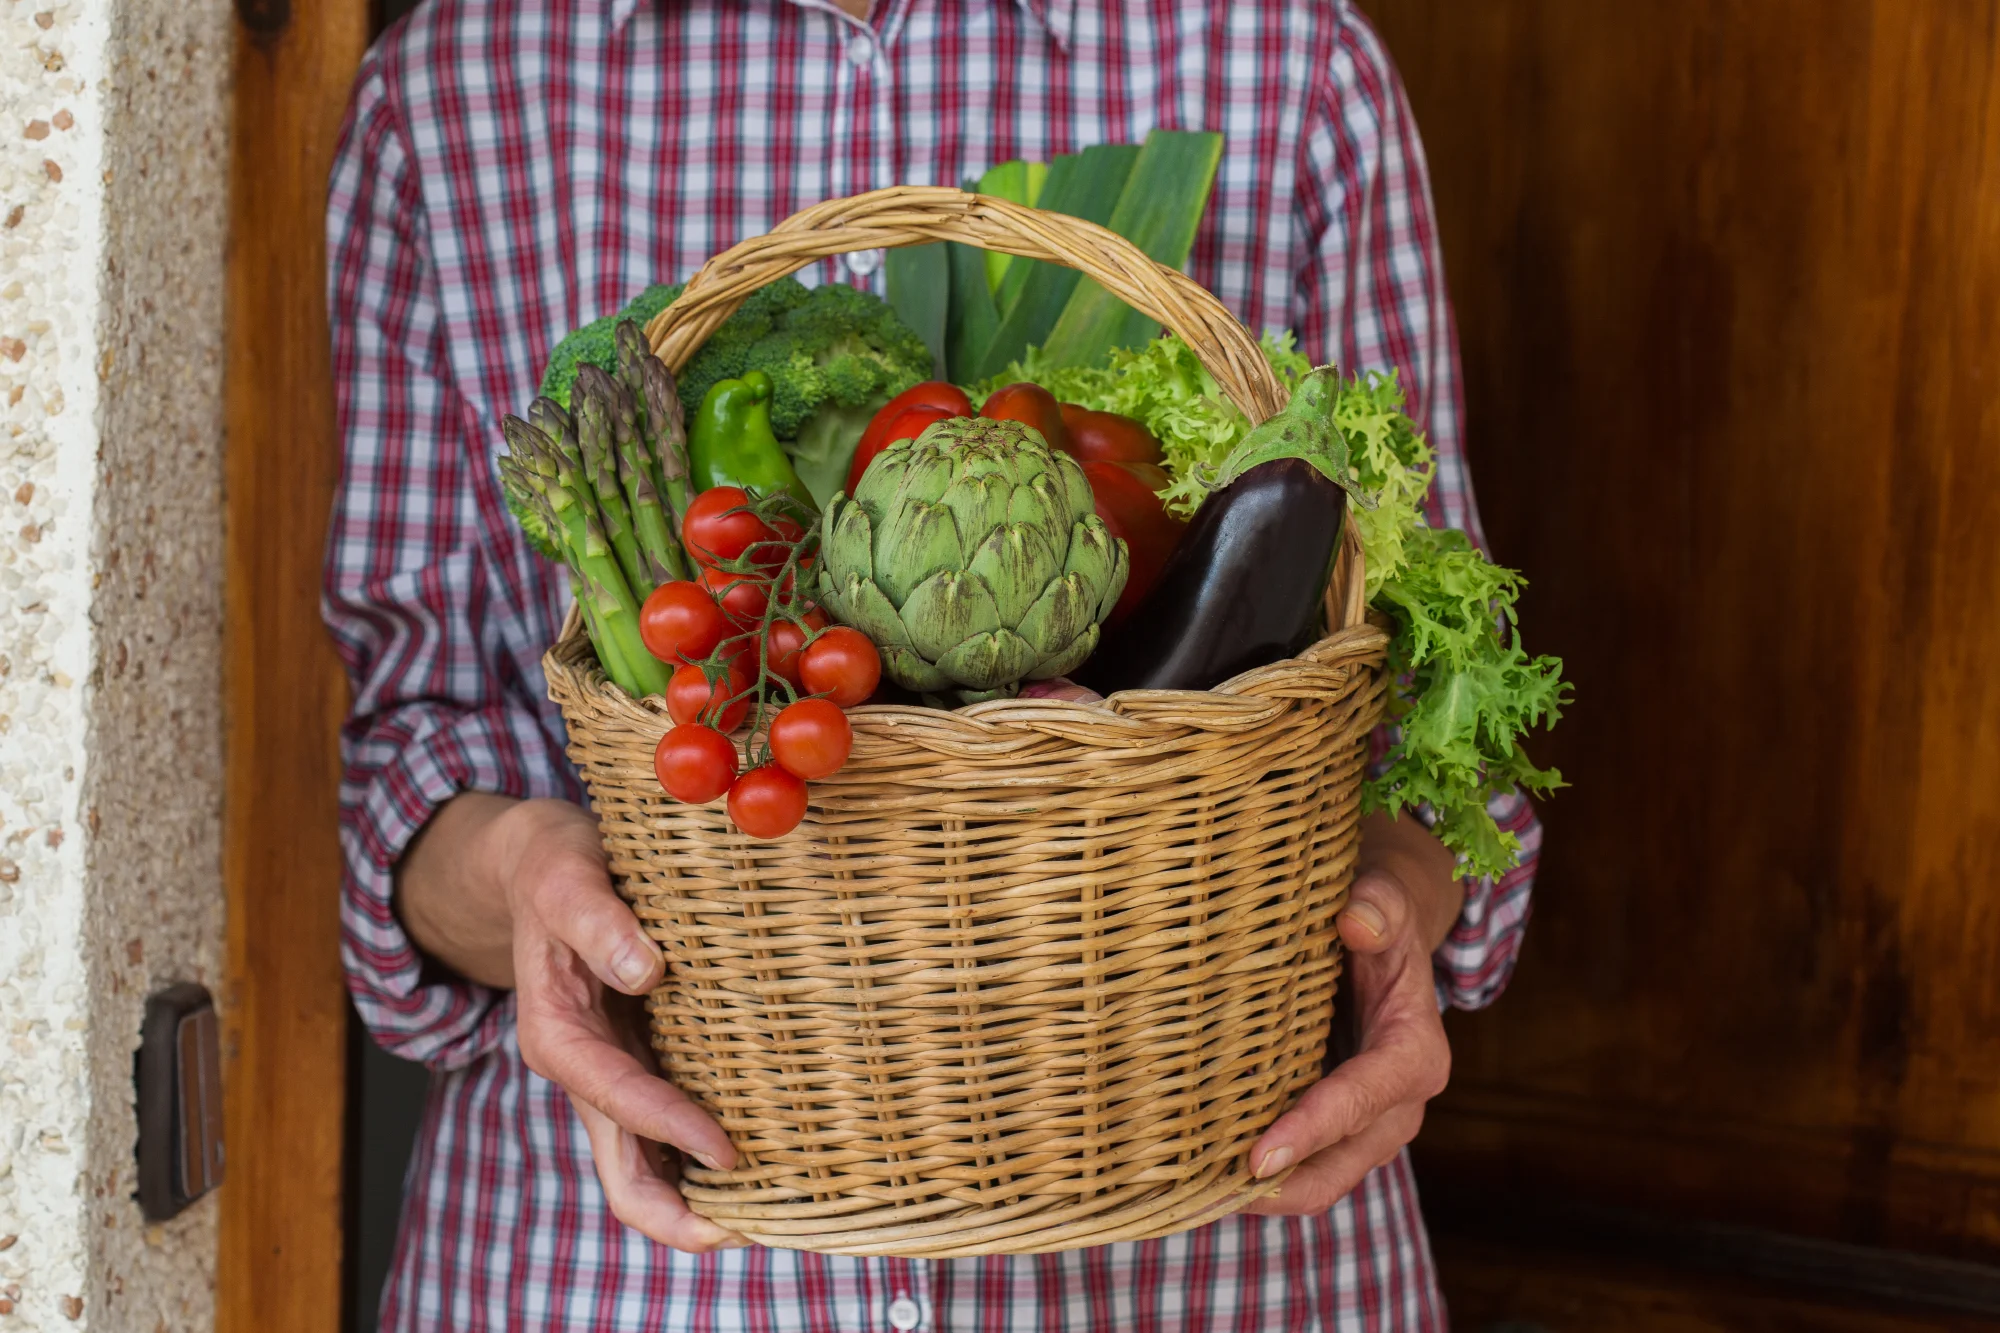 Woman holding a basket full of an assortment of organic farmer produced vegetables.